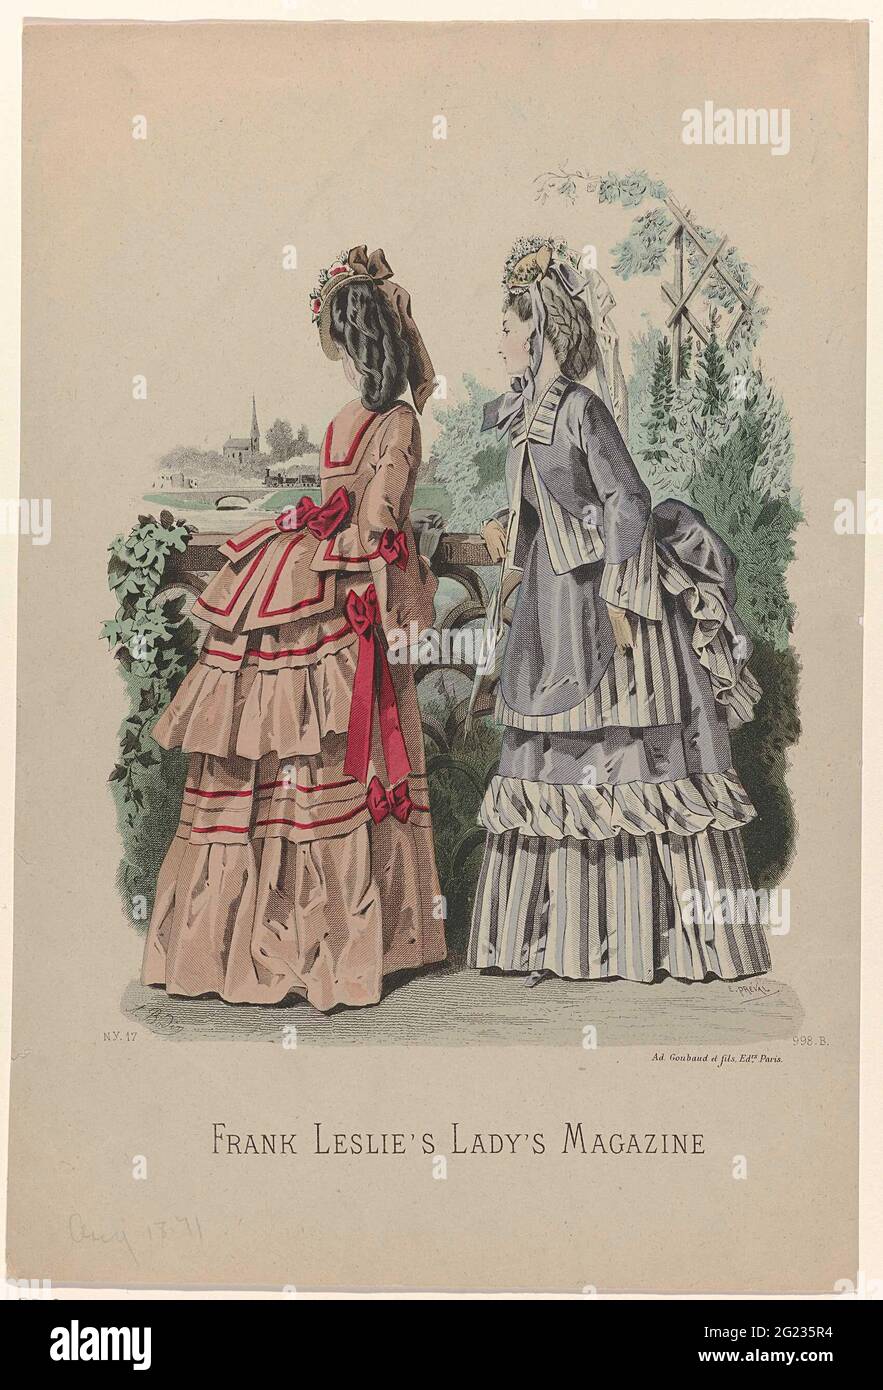 Frank Leslie's Lady's Magazine, 1871, NY.17, 998.B. Two women at a  balustrade, dressed in wins with queue. Accessories: hats, earrings,  gloves, parasol. A steam train drives in the background. French image in